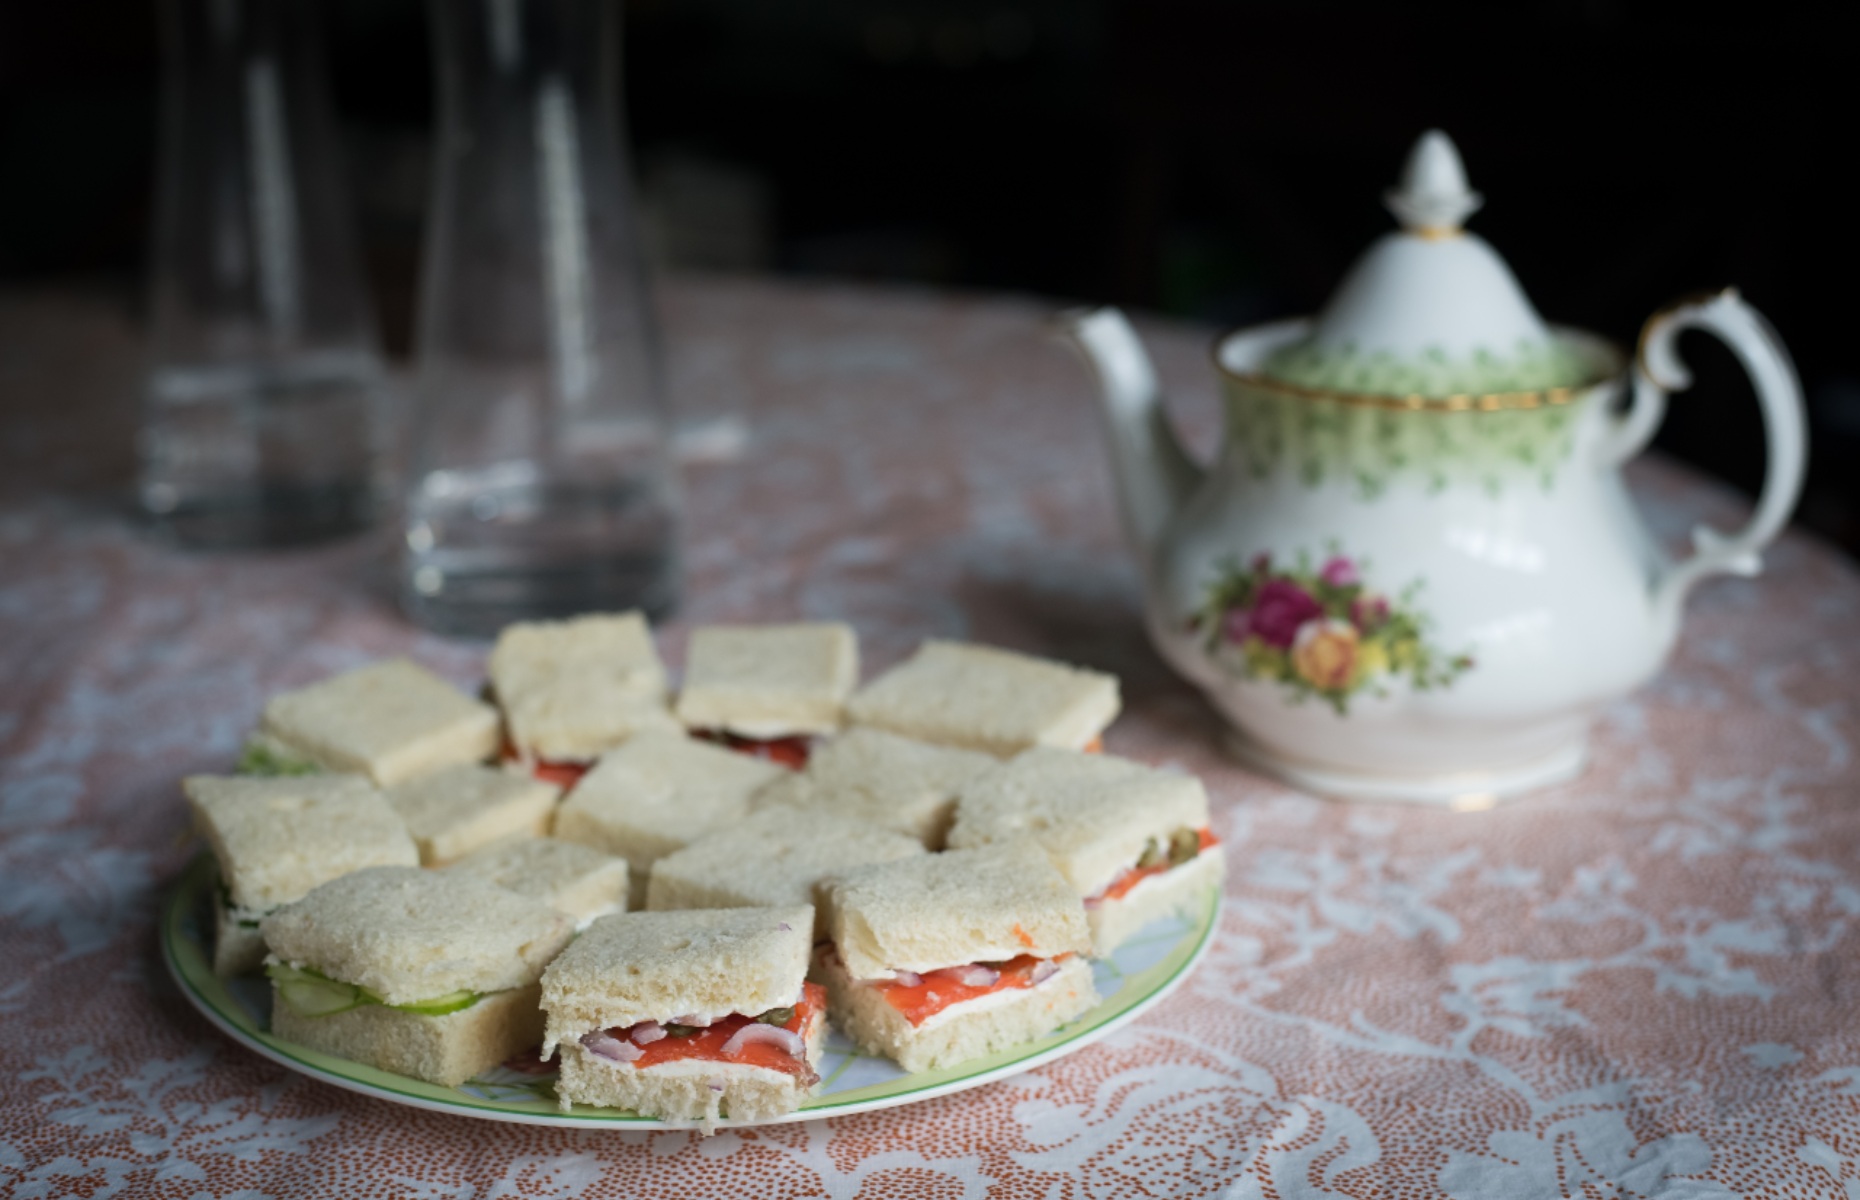 Cold sandwiches with tea (Image: Vfchen/Shutterstock)